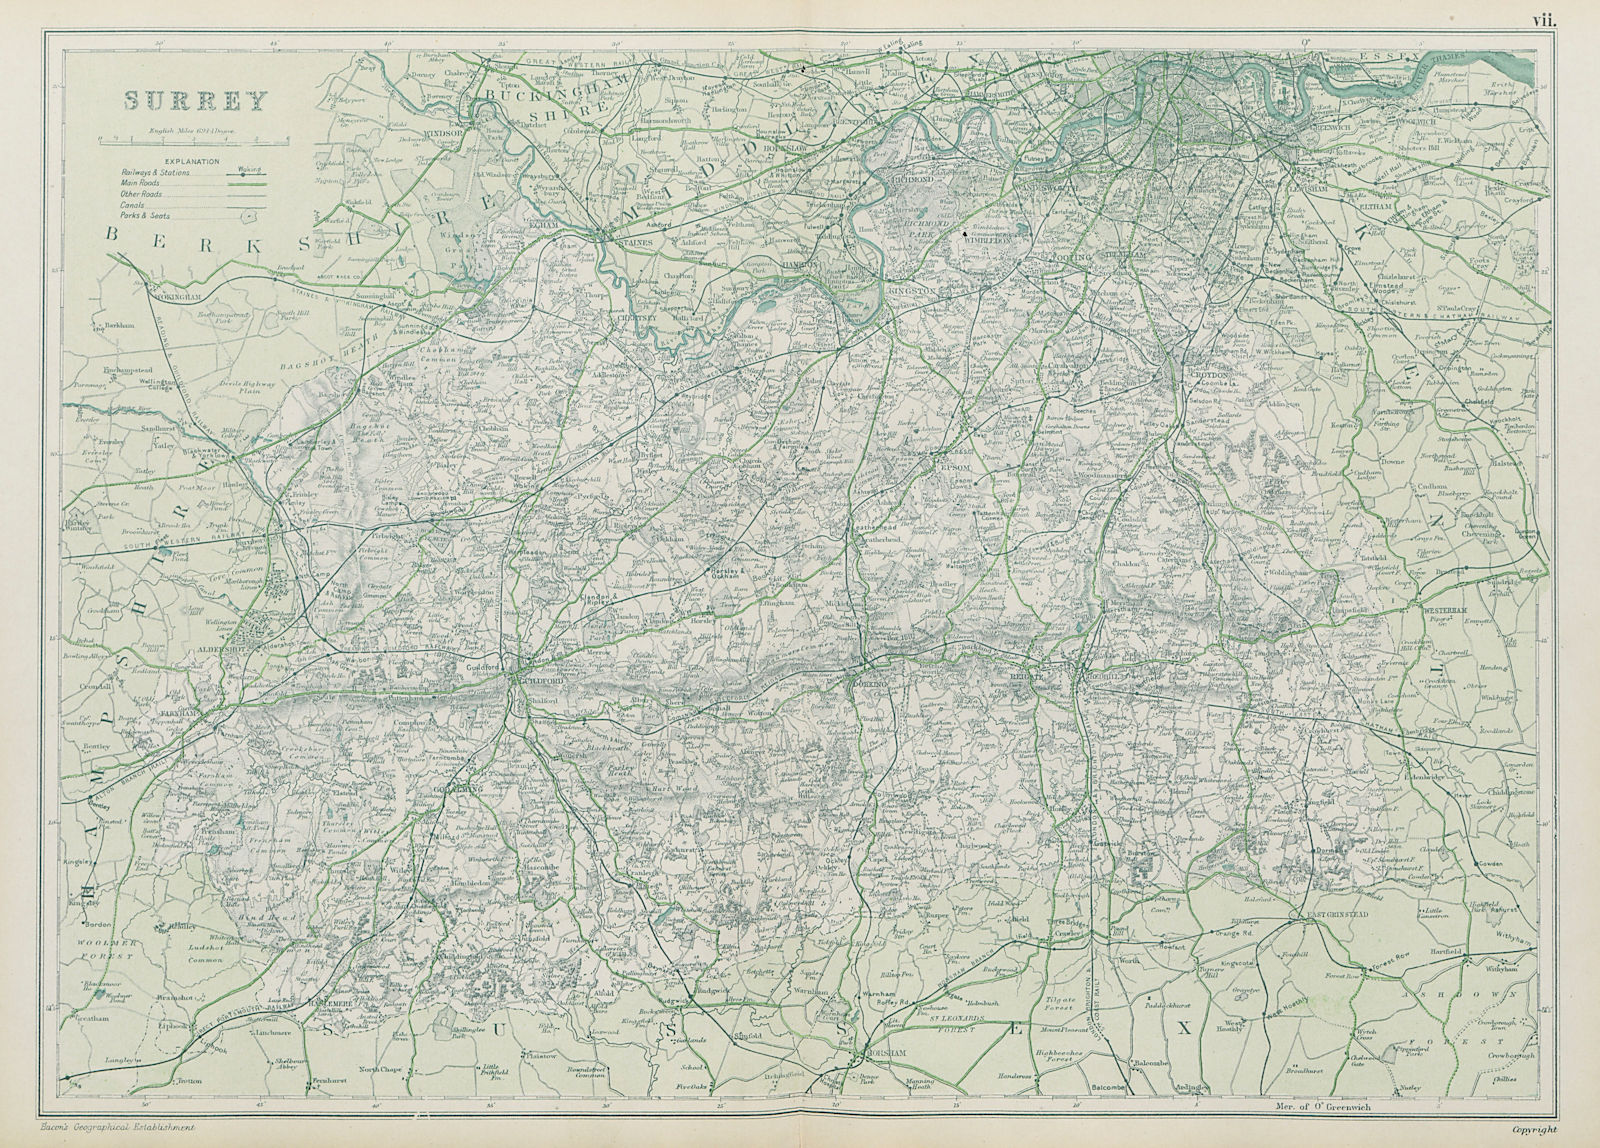 SURREY. Showing Parliamentary divisions, boroughs & parks. BACON 1913 old map